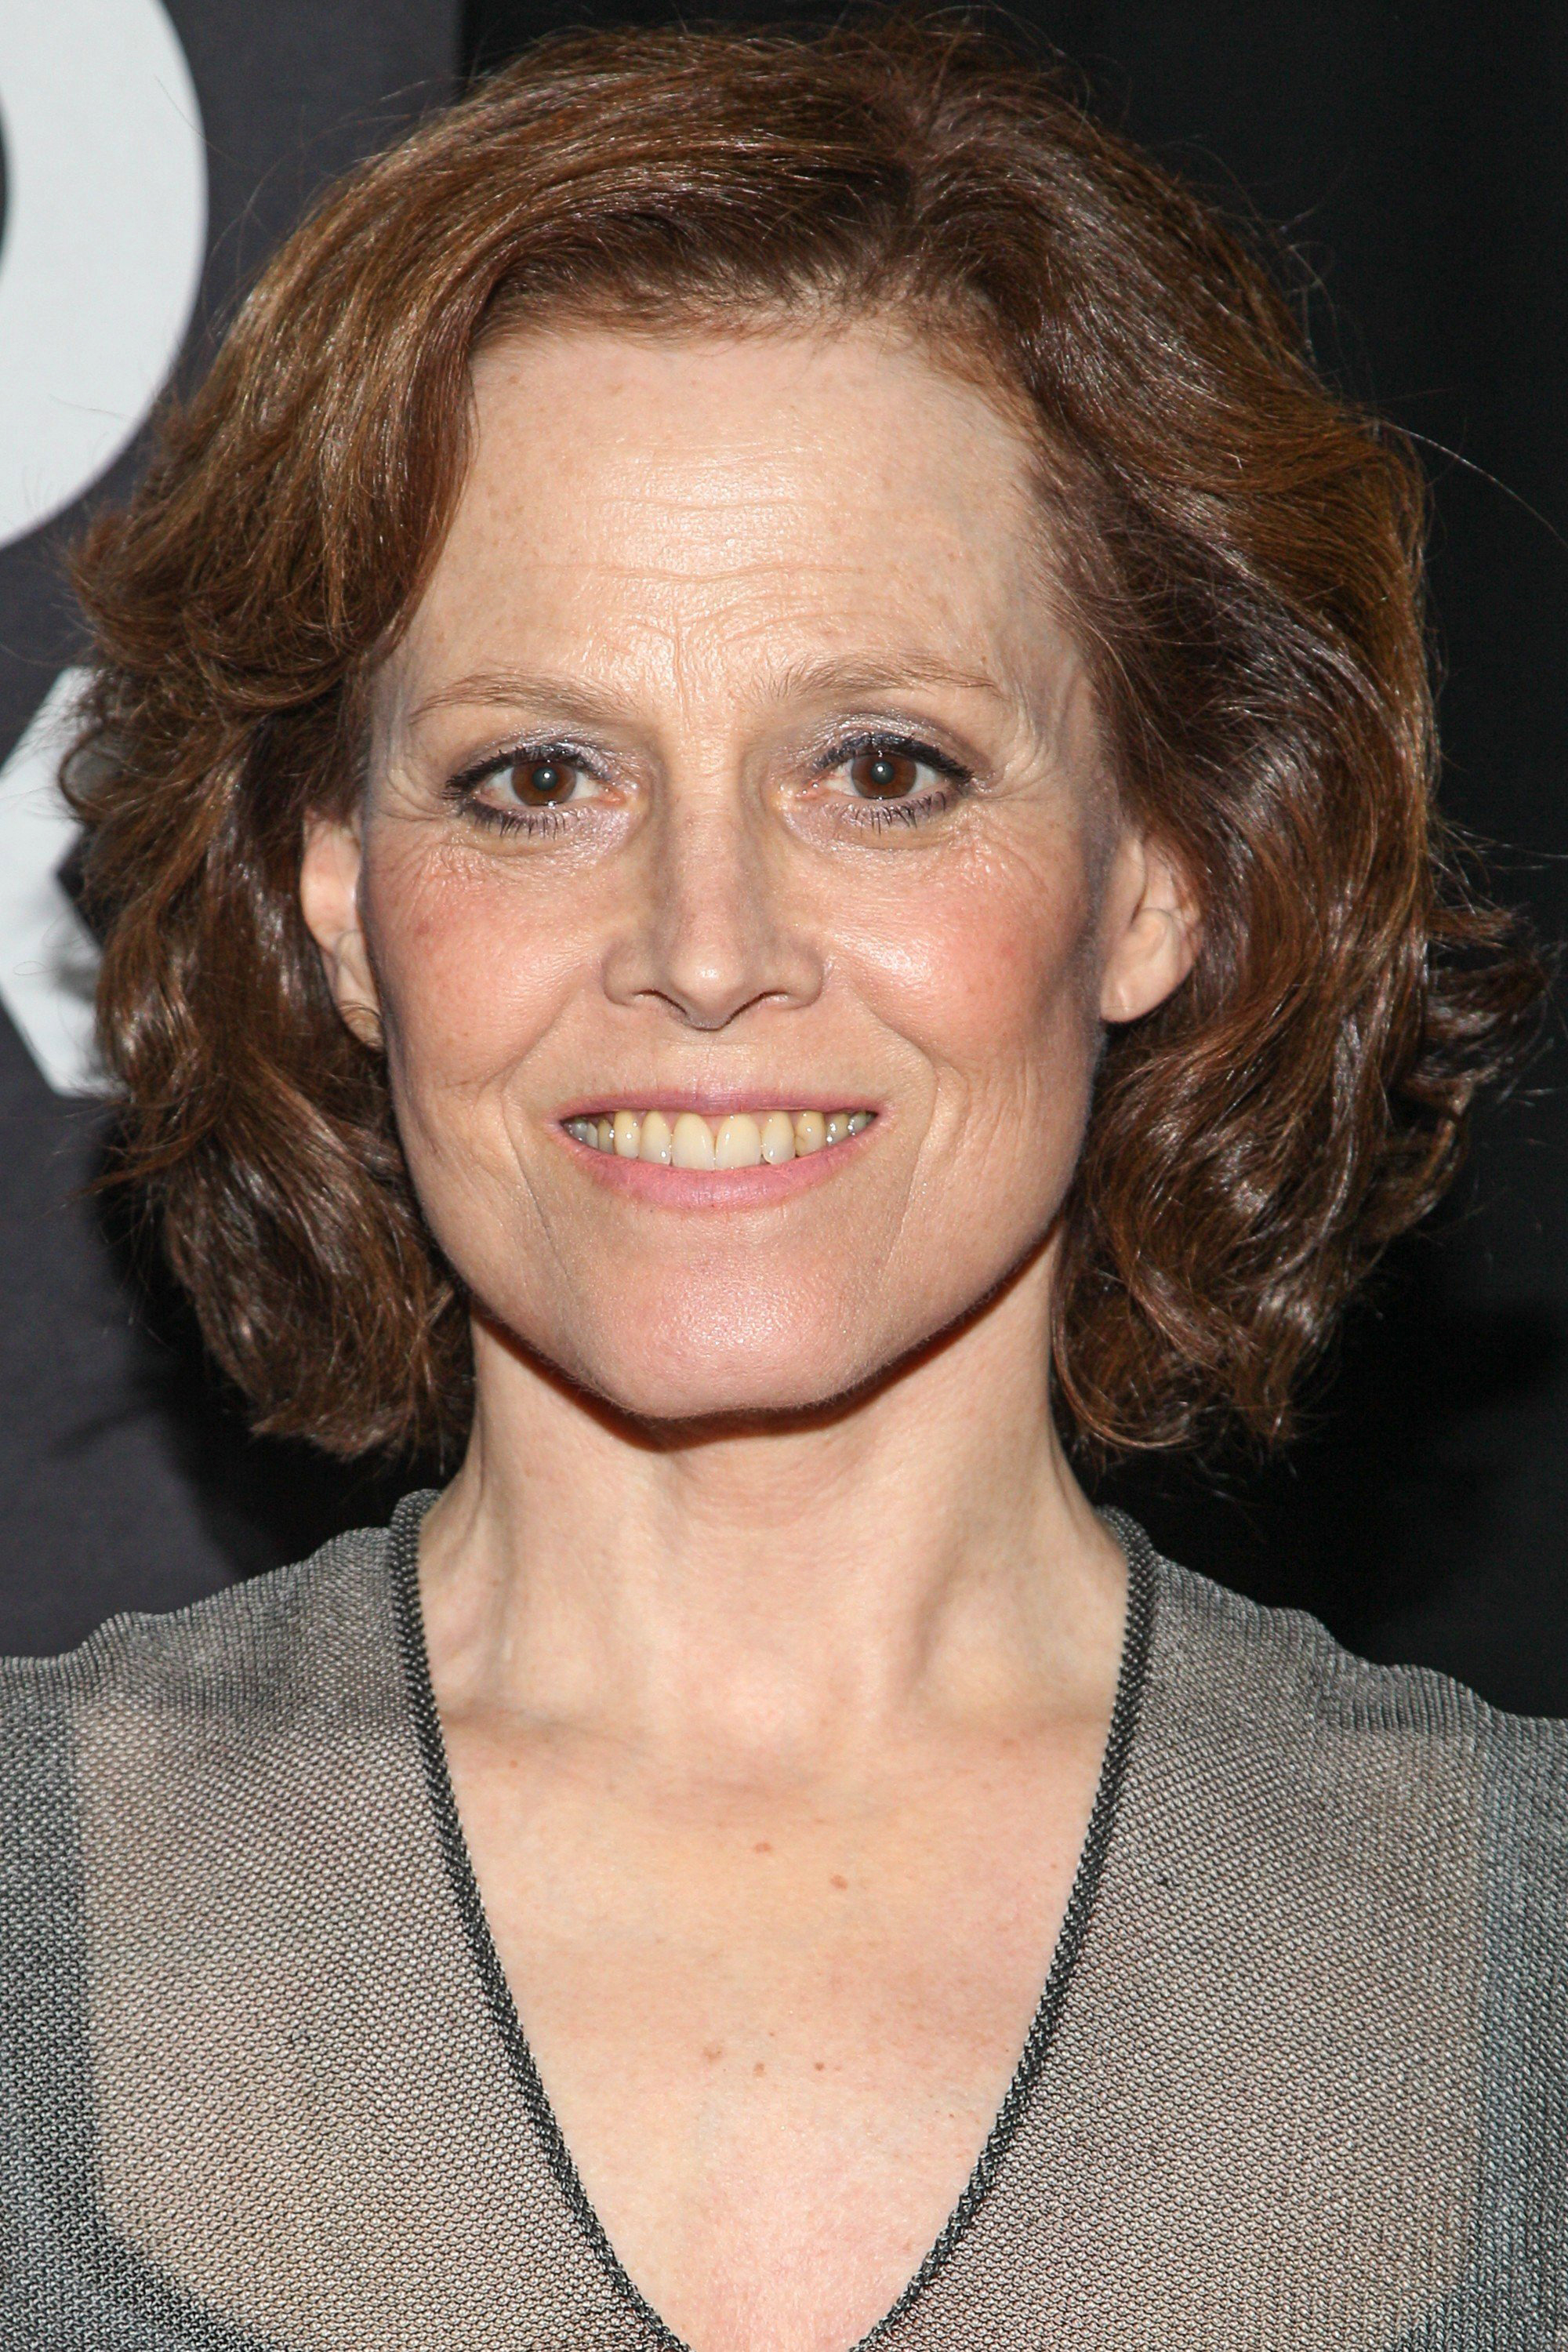 Sigourney Weaver attends the L.A. Times Hero Complex Film Festival 'Alien And Aliens' screening at TCL Chinese 6 Theatres on June 1, 2014 in Hollywood, Califor. (Paul A. Hebert—Press Line Photos/Corbis)